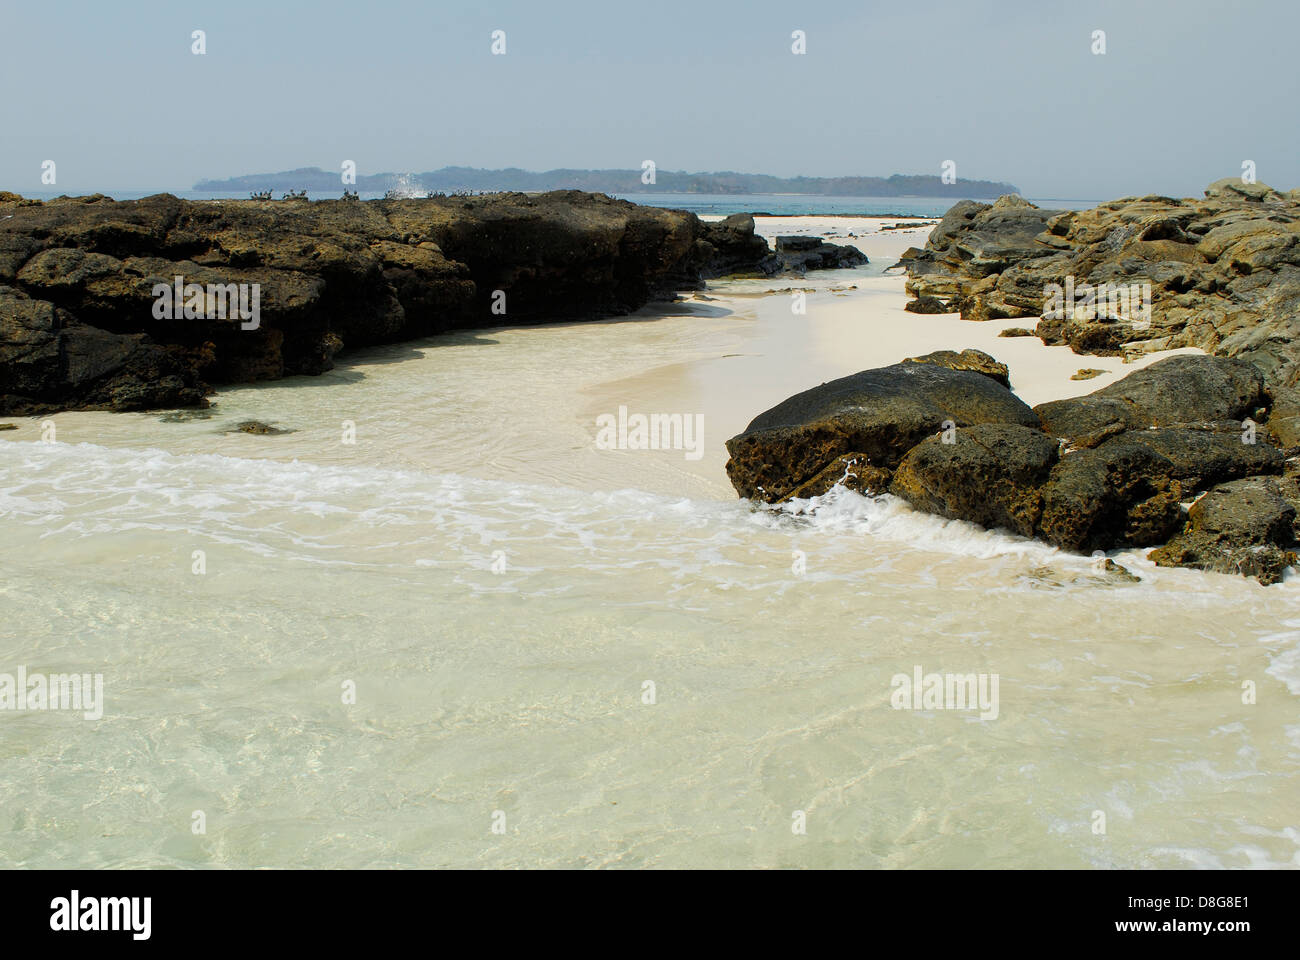 Waves breaking on the rocks at the shore of Chapera island Stock Photo